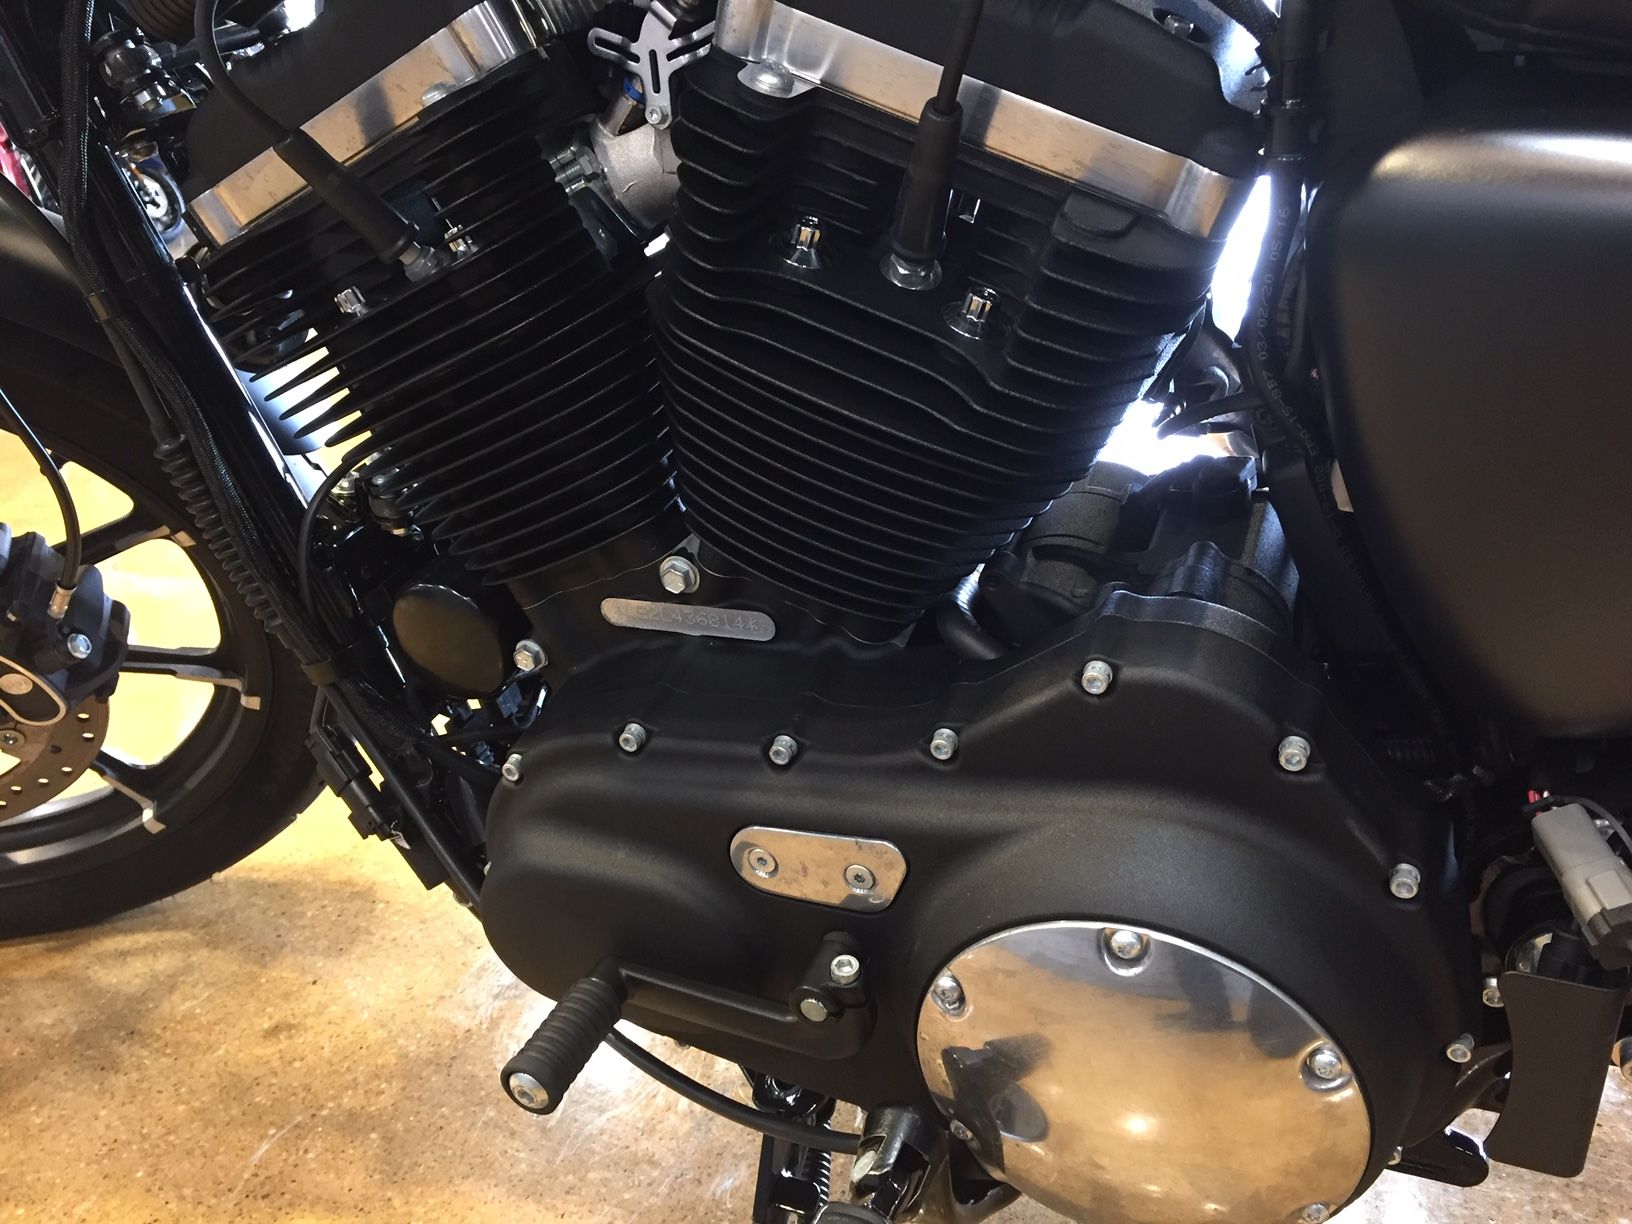 2020 Harley-Davidson IRON 883 in West Long Branch, New Jersey - Photo 8